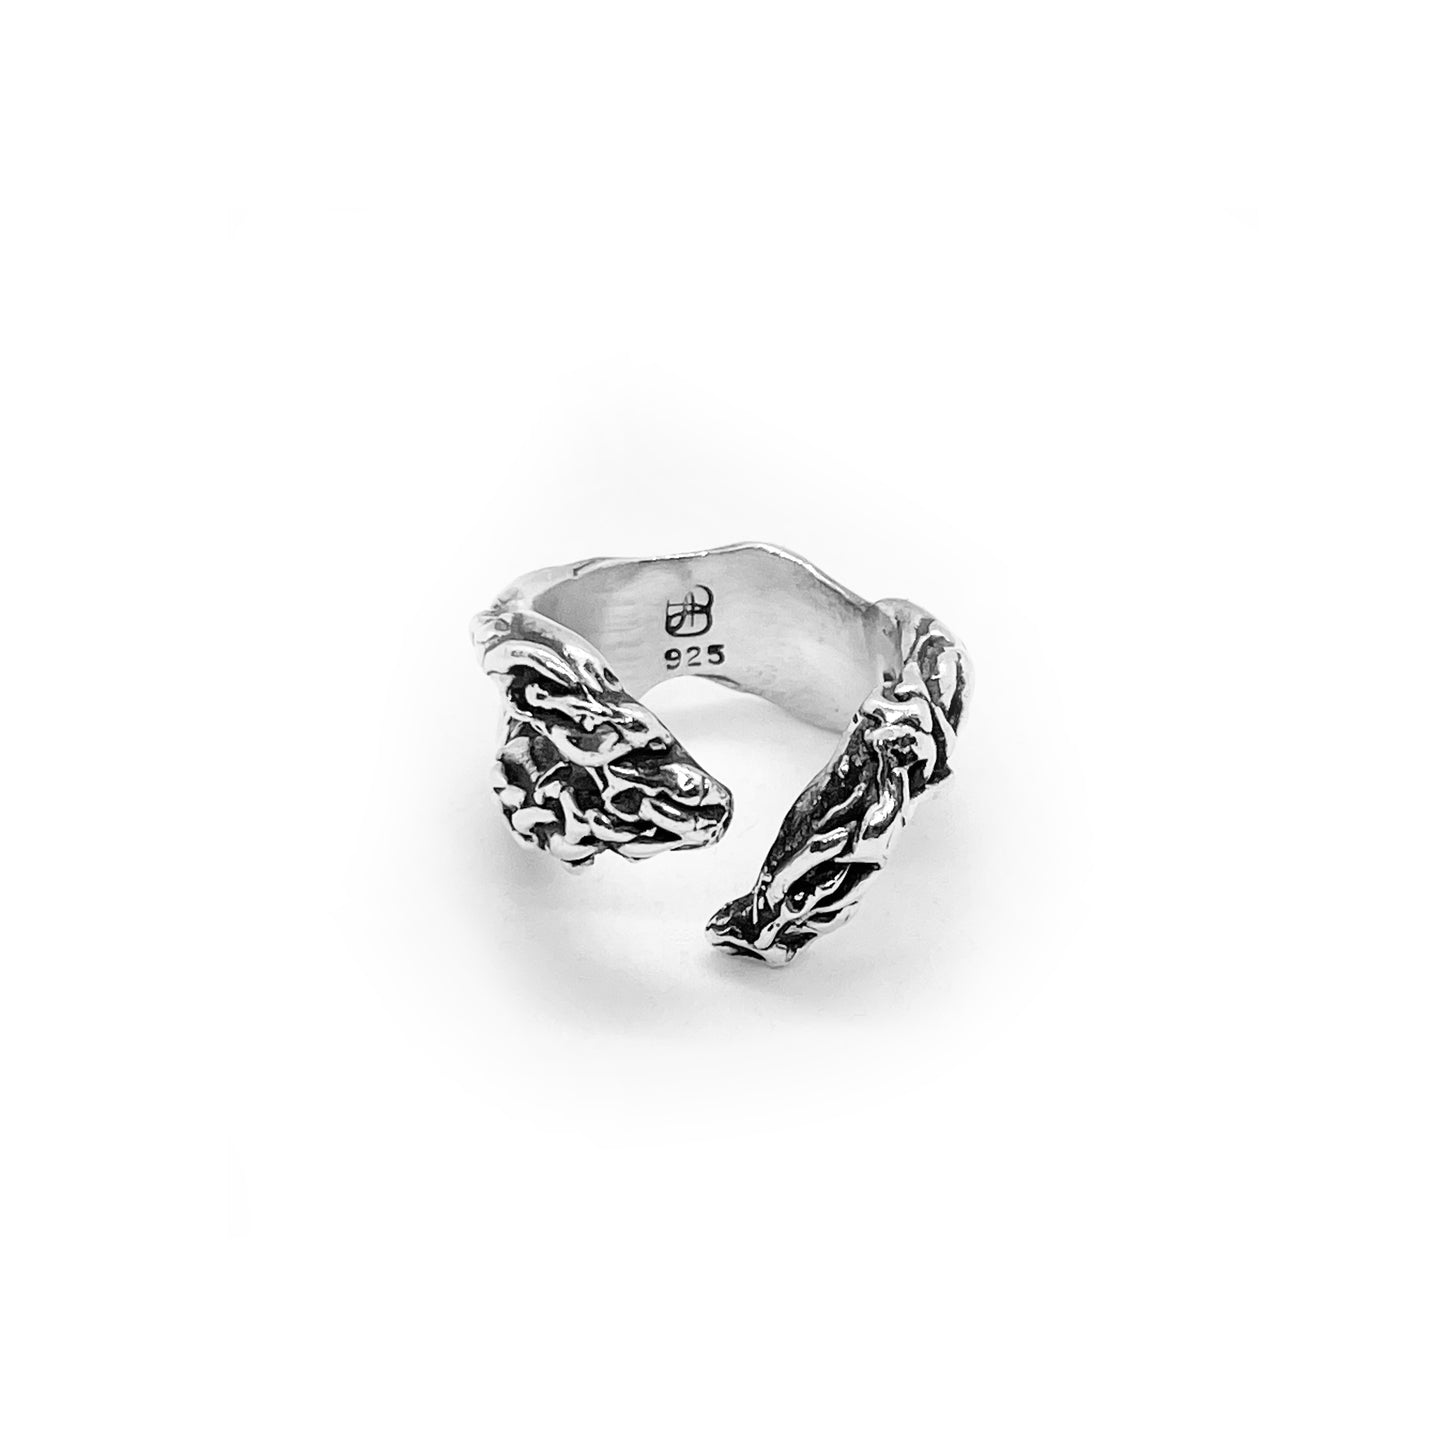 Asclepius Ring - Adjustable Ring - Open Ring - Twisted Ring - Sterling Silver Ring - Unique Ring - Fun Silver Ring - Pretty Ring